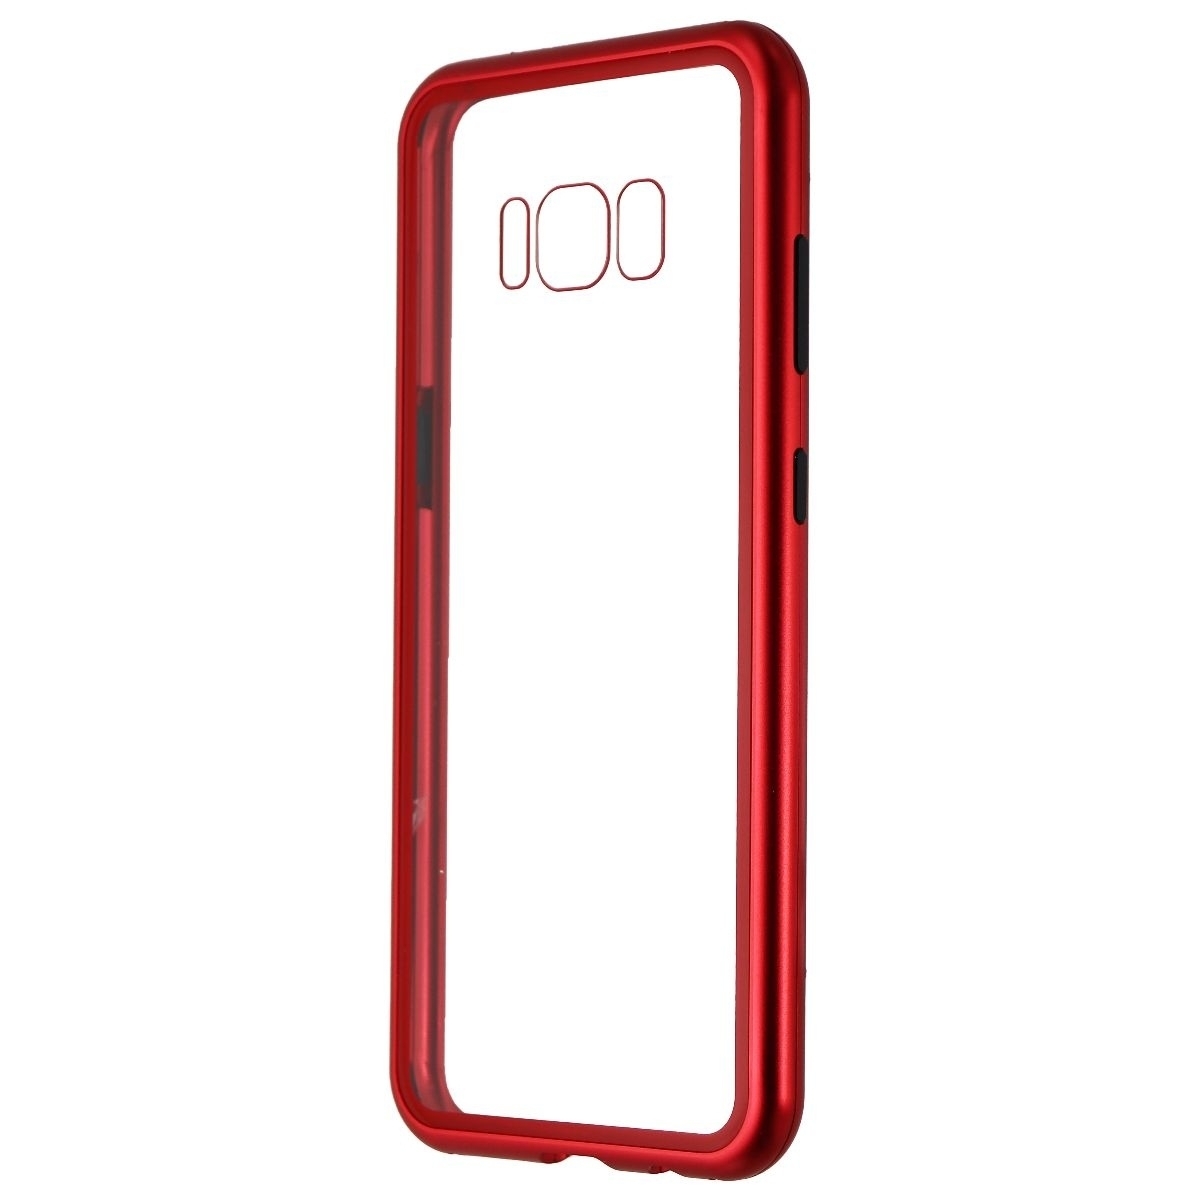 Zore Hybrid Glass Series Case For Samsung Galaxy S8 - Clear/Red